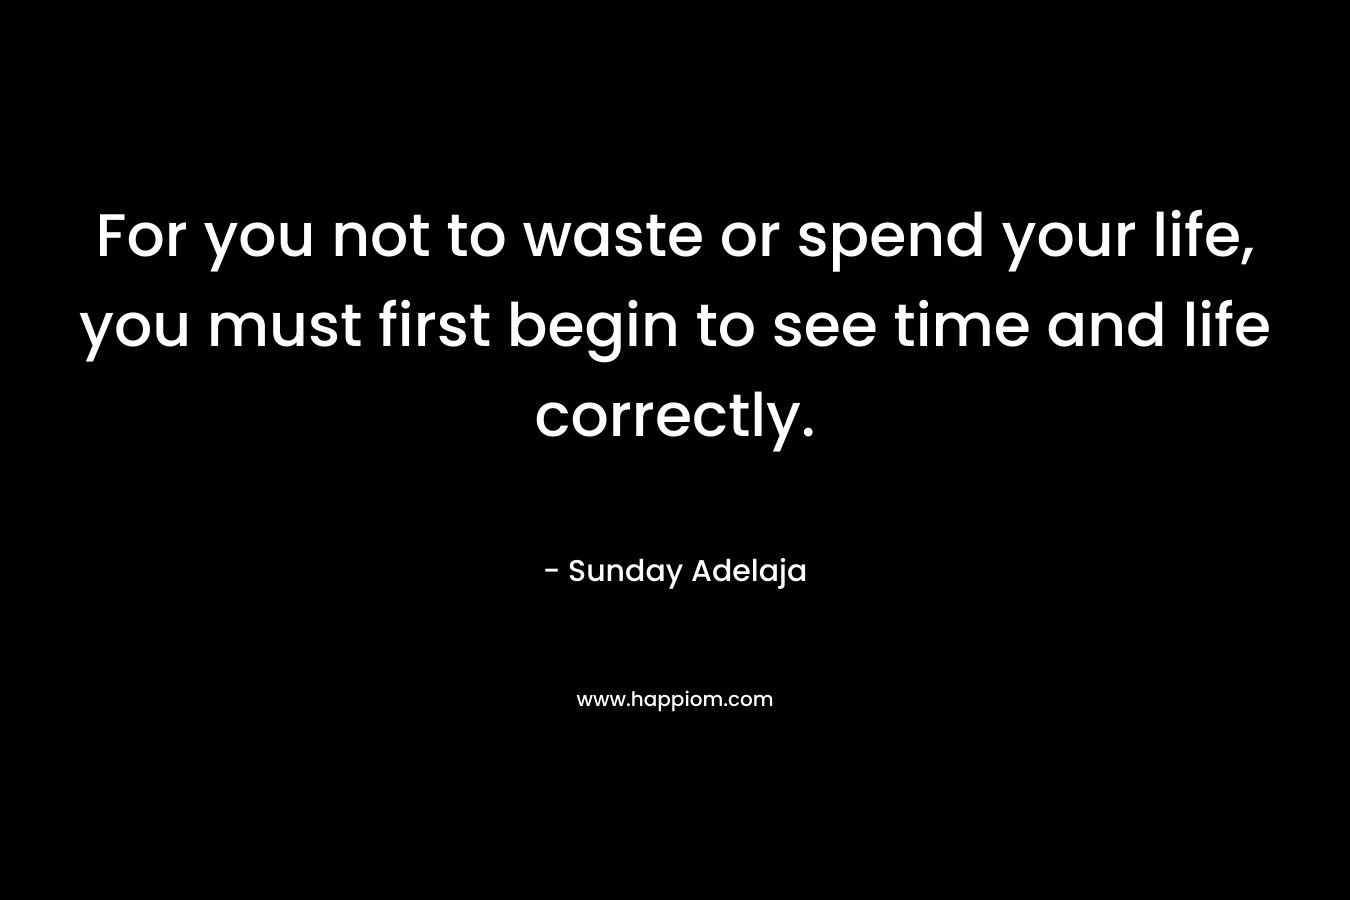 For you not to waste or spend your life, you must first begin to see time and life correctly.